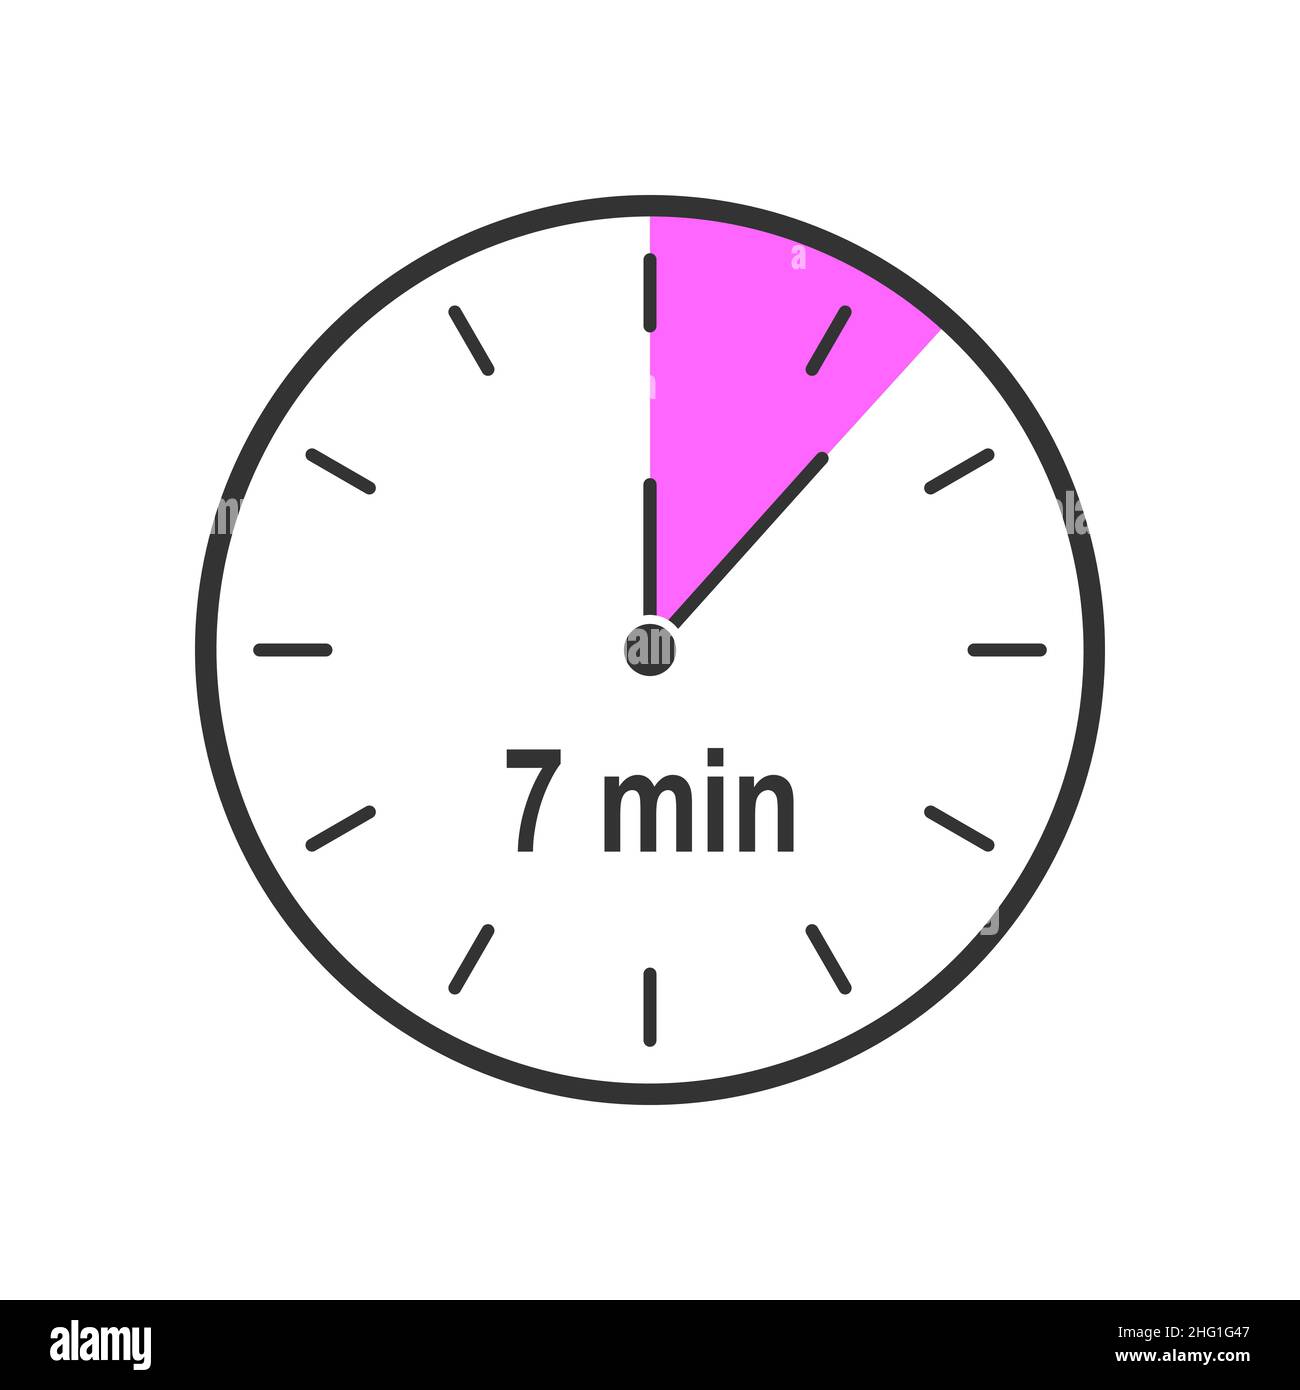 https://c8.alamy.com/comp/2HG1G47/timer-icon-with-7-minute-time-interval-countdown-clock-or-stopwatch-symbol-infographic-element-for-cooking-preparing-instruction-vector-flat-illustration-2HG1G47.jpg